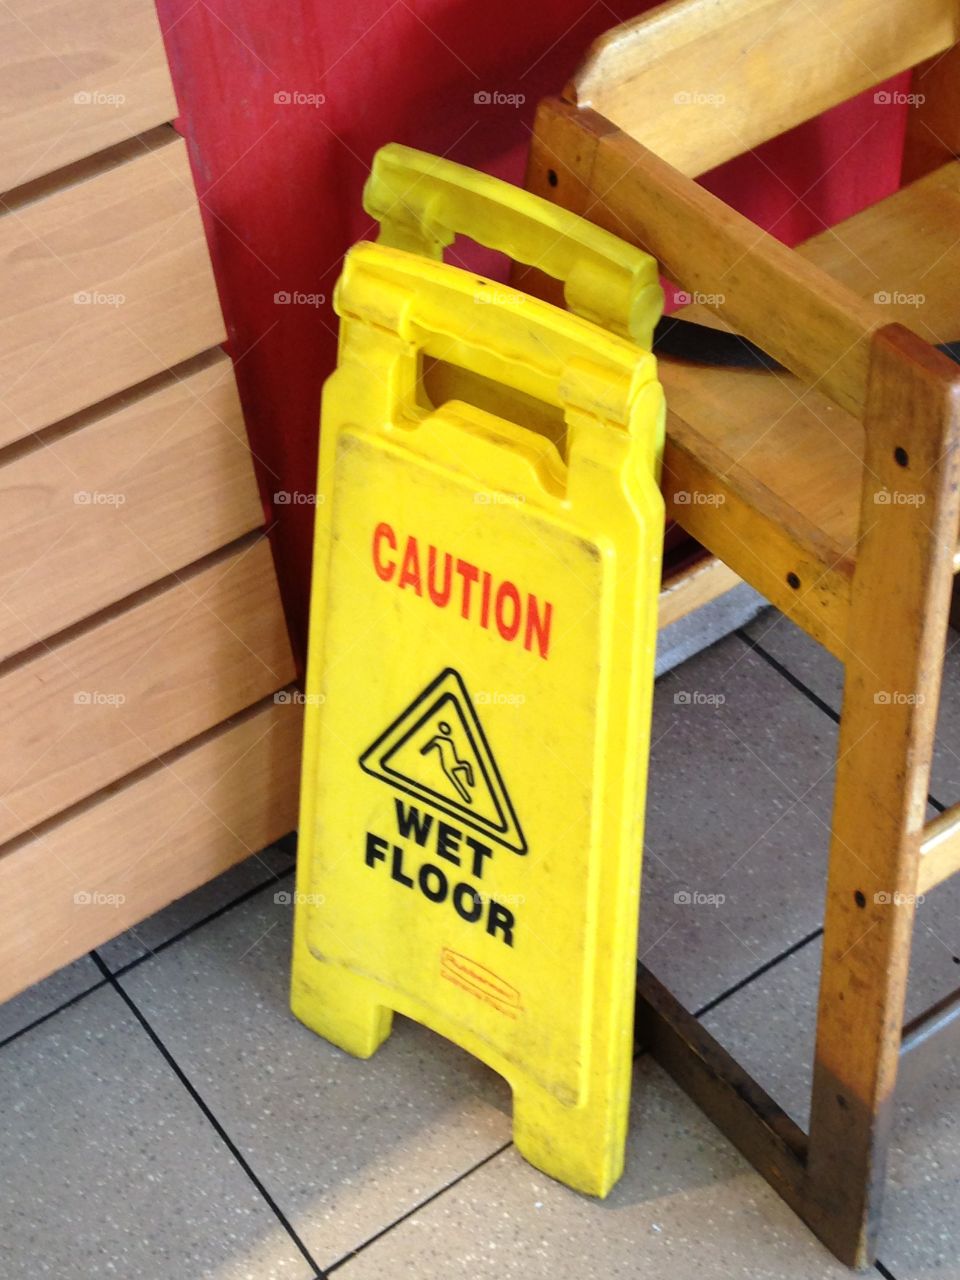 CAUTION WET FLOOR - safety signs from the cleaning staff at the restaurant